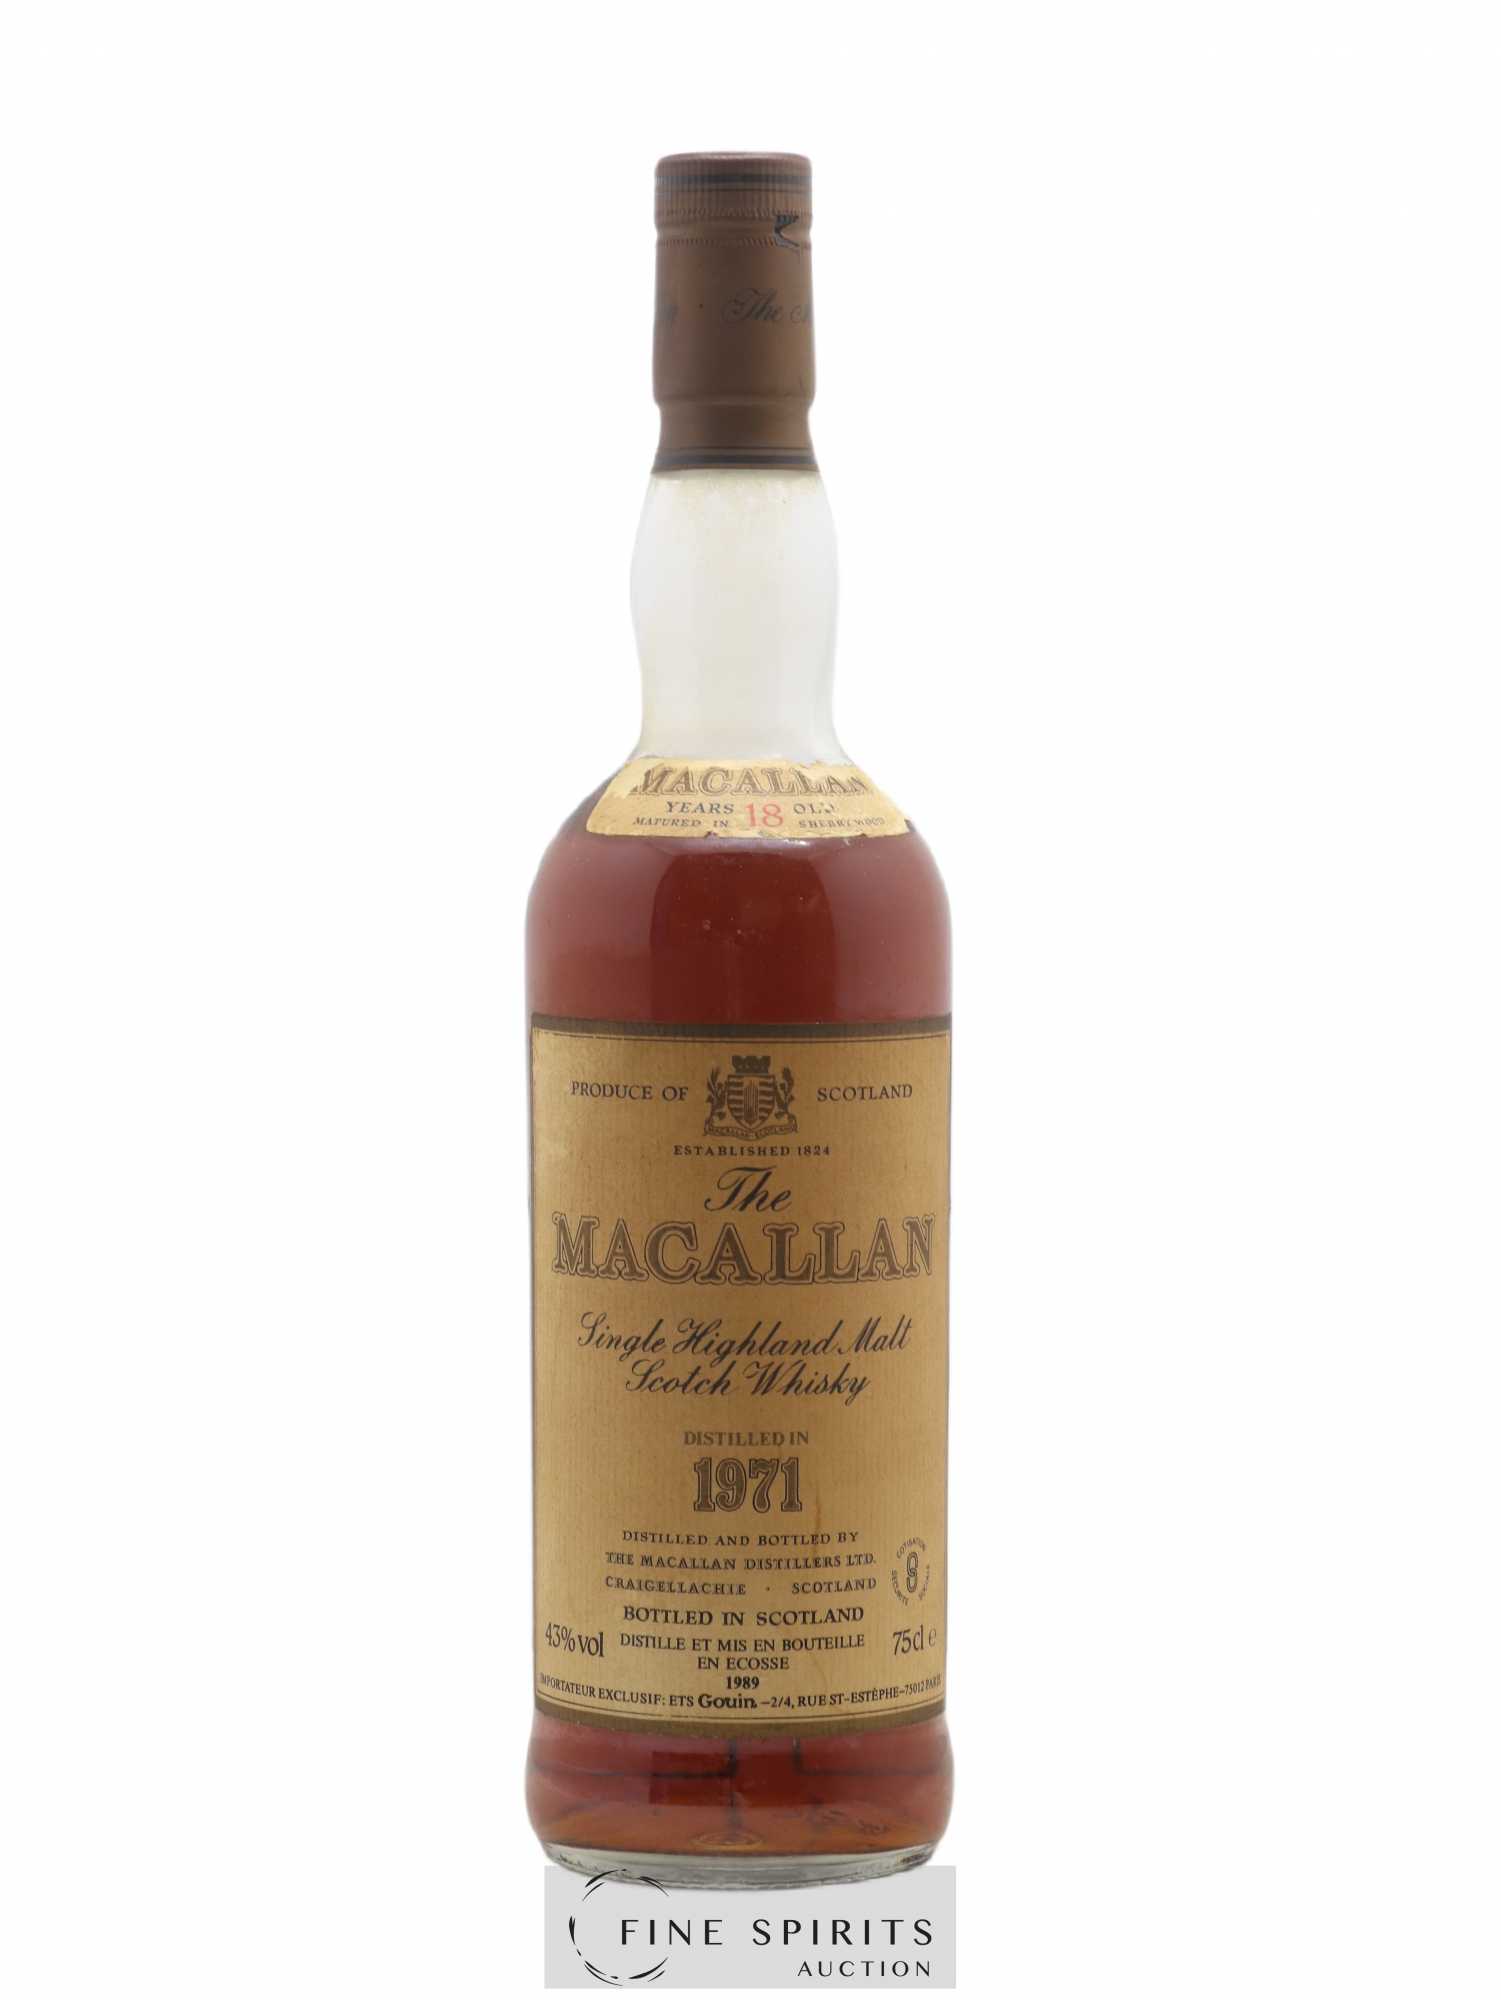 Macallan (The) 18 years 1971 Of. Sherry Wood Matured - bottled 1989 Gouin Import